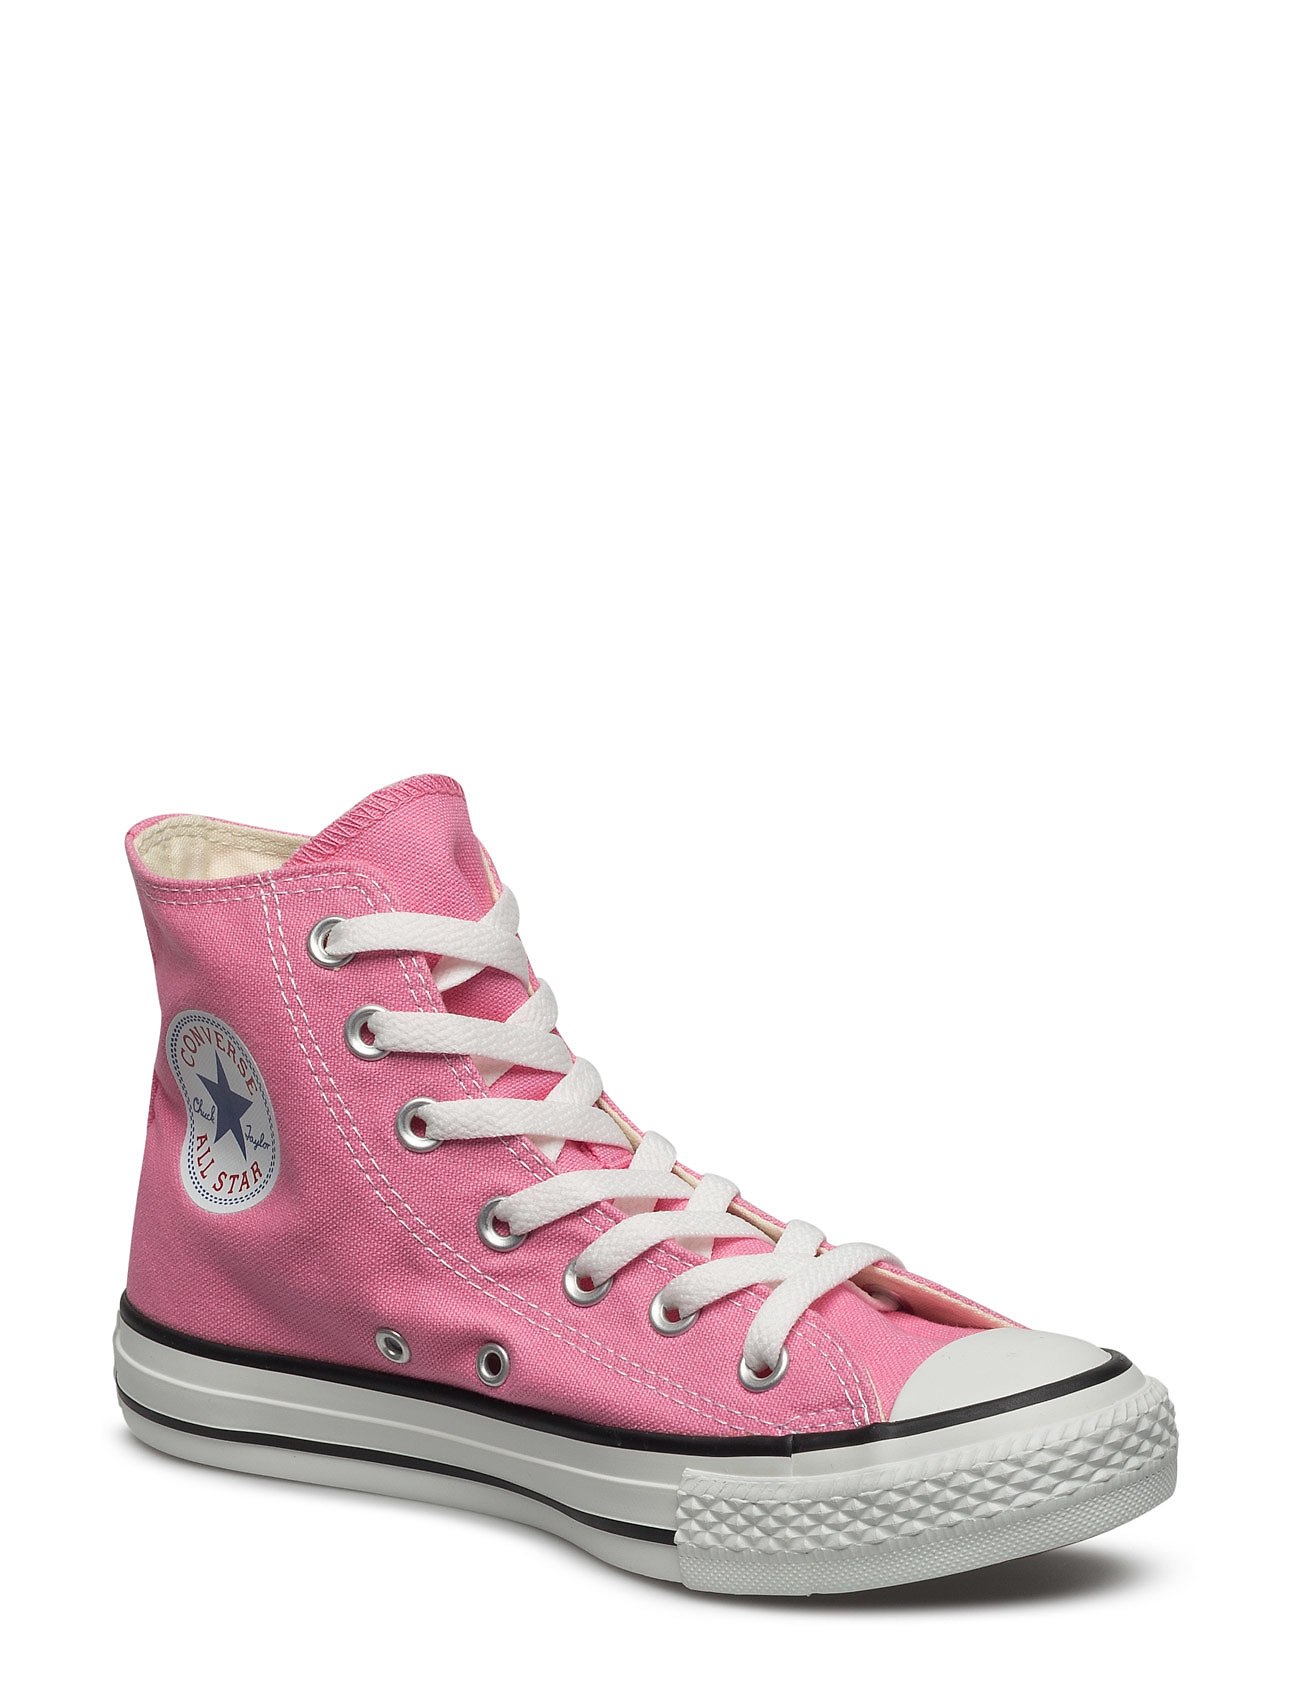 Converse "Chuck Taylor All Star Sport Sneakers High-top Pink Converse"